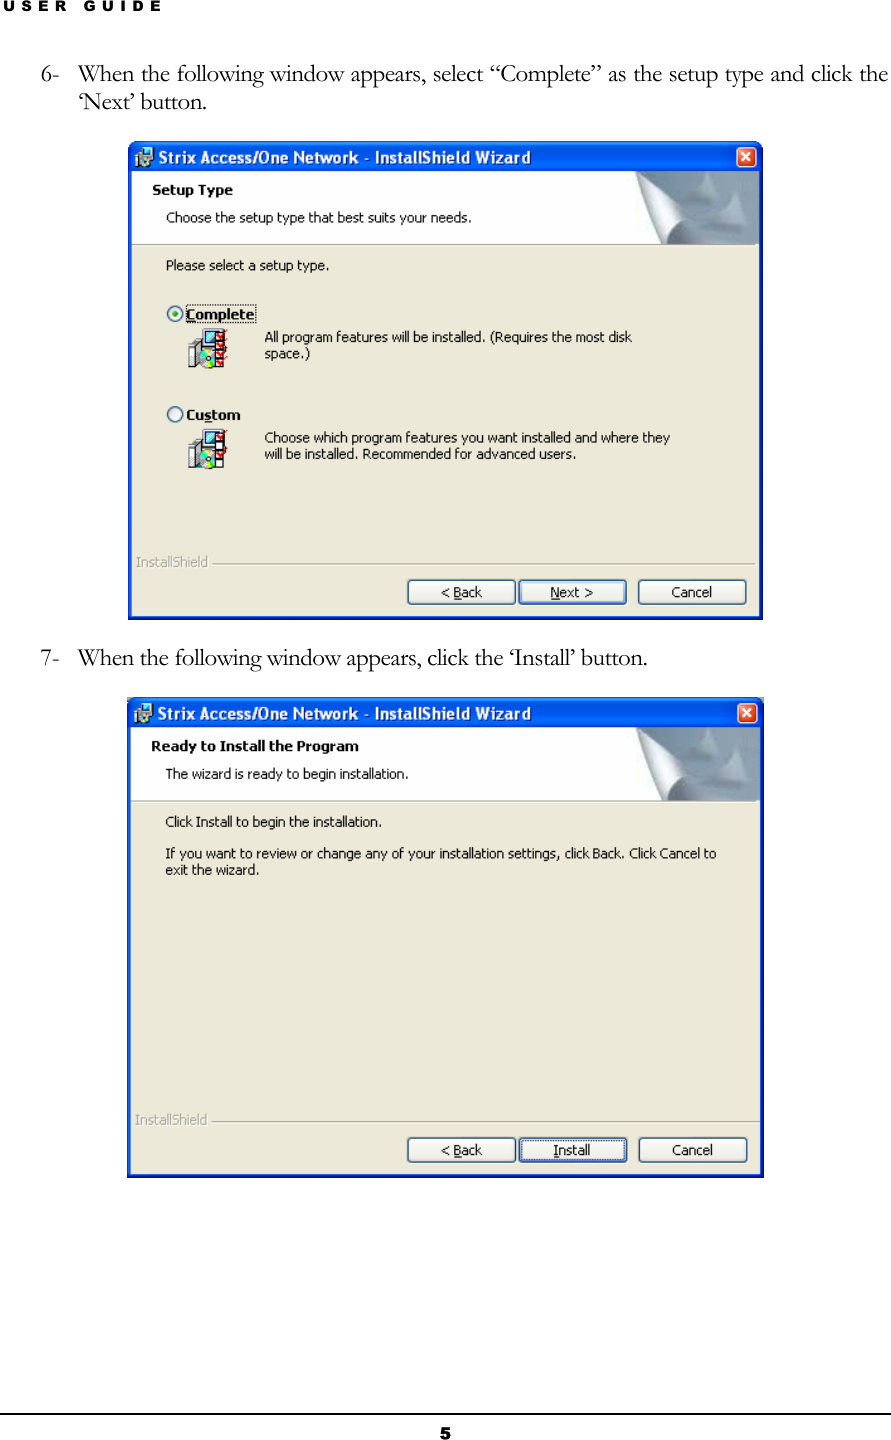 USER GUIDE 6- When the following window appears, select “Complete” as the setup type and click the ‘Next’ button.  7- When the following window appears, click the ‘Install’ button.     5 